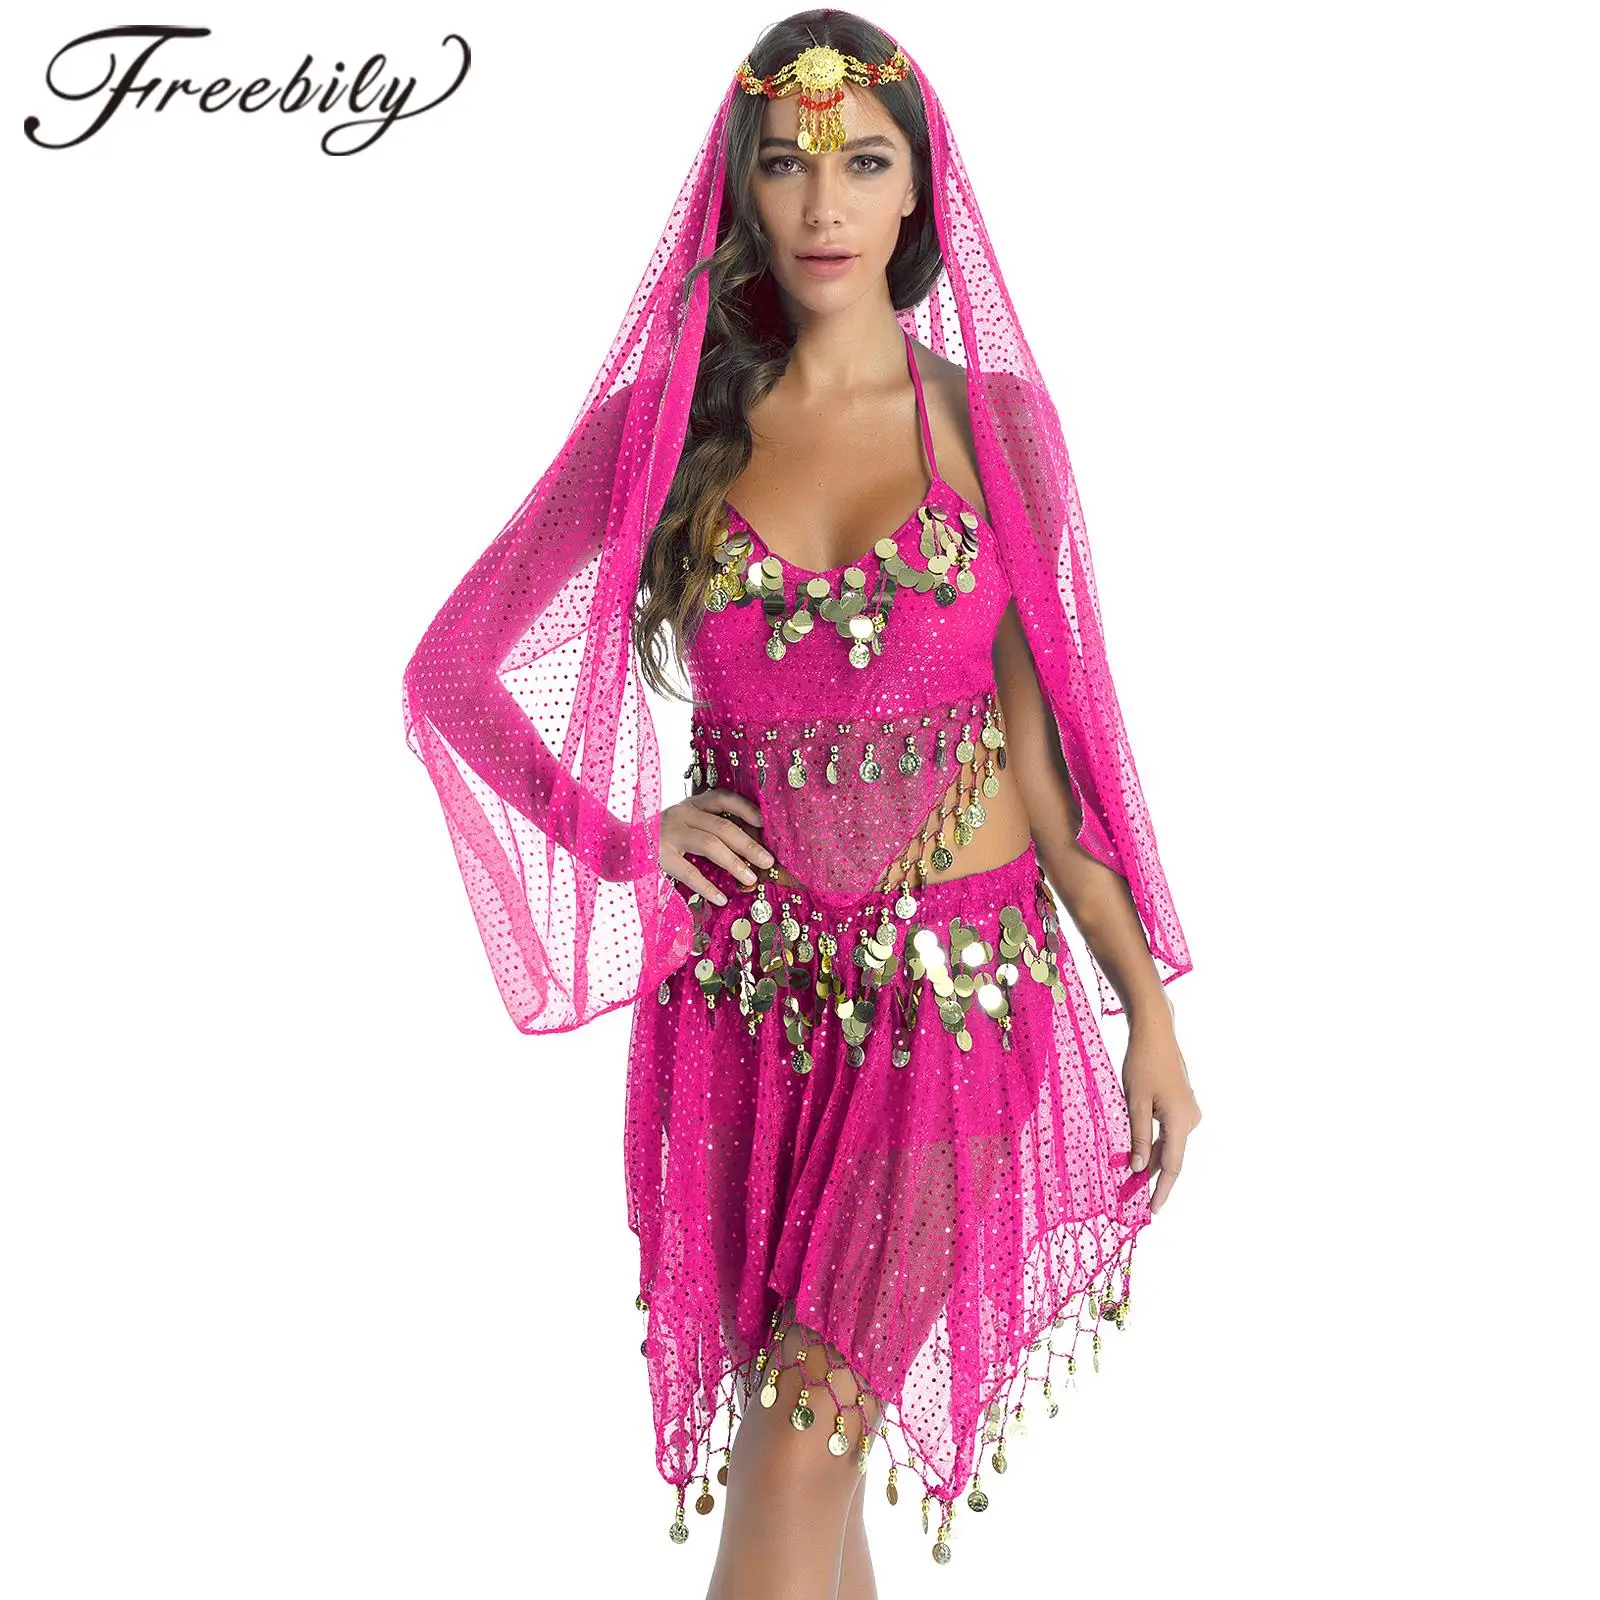 

Women Belly Dance Costume Indian Dancing Costume Sets Dancewear Egyption Egypt Bollywood Clothes Oriental Lady Bellydance Dress